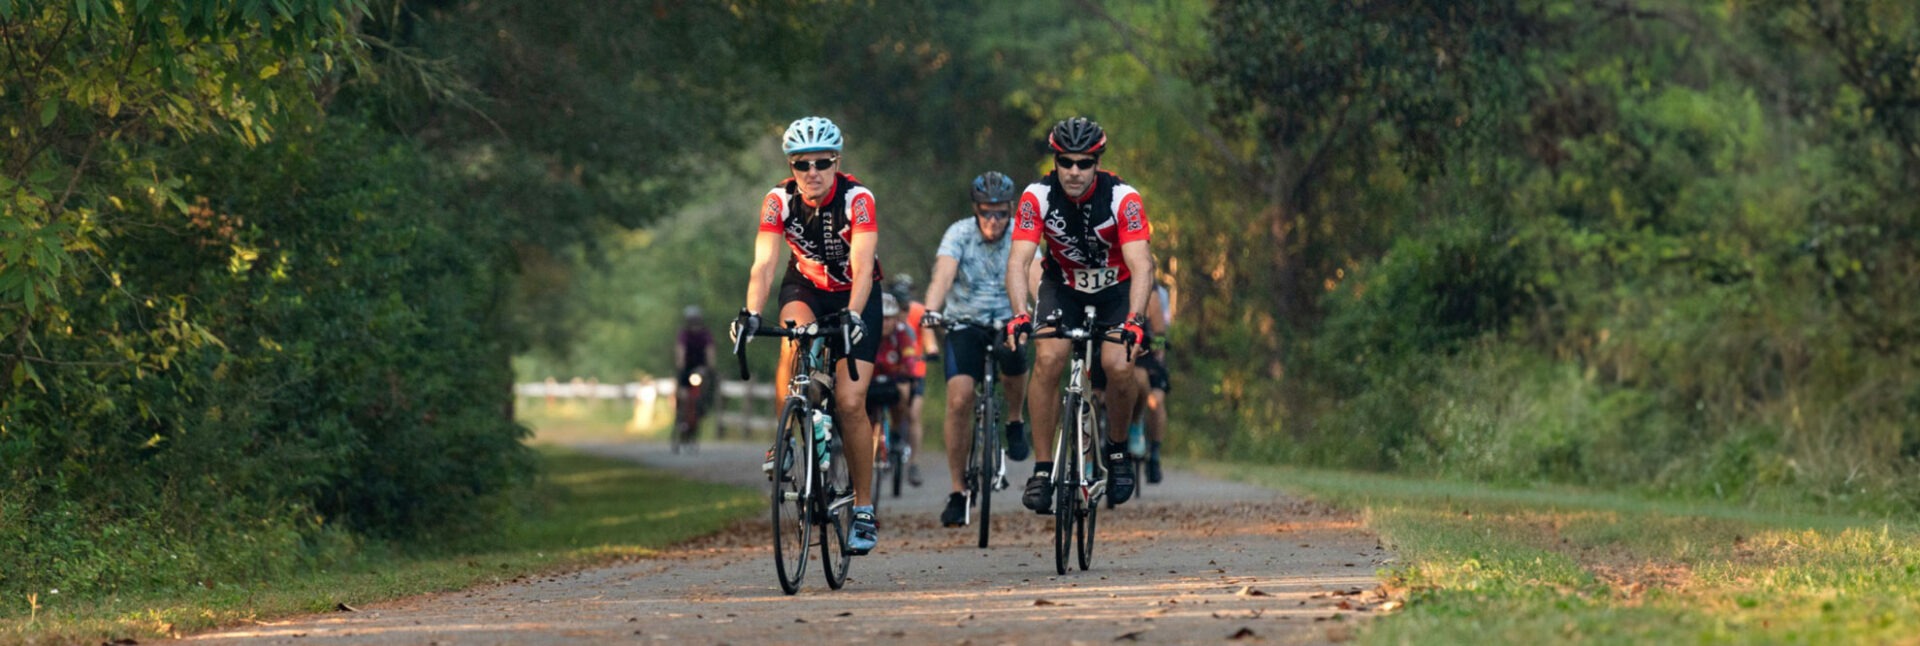 two cyclists on paved path